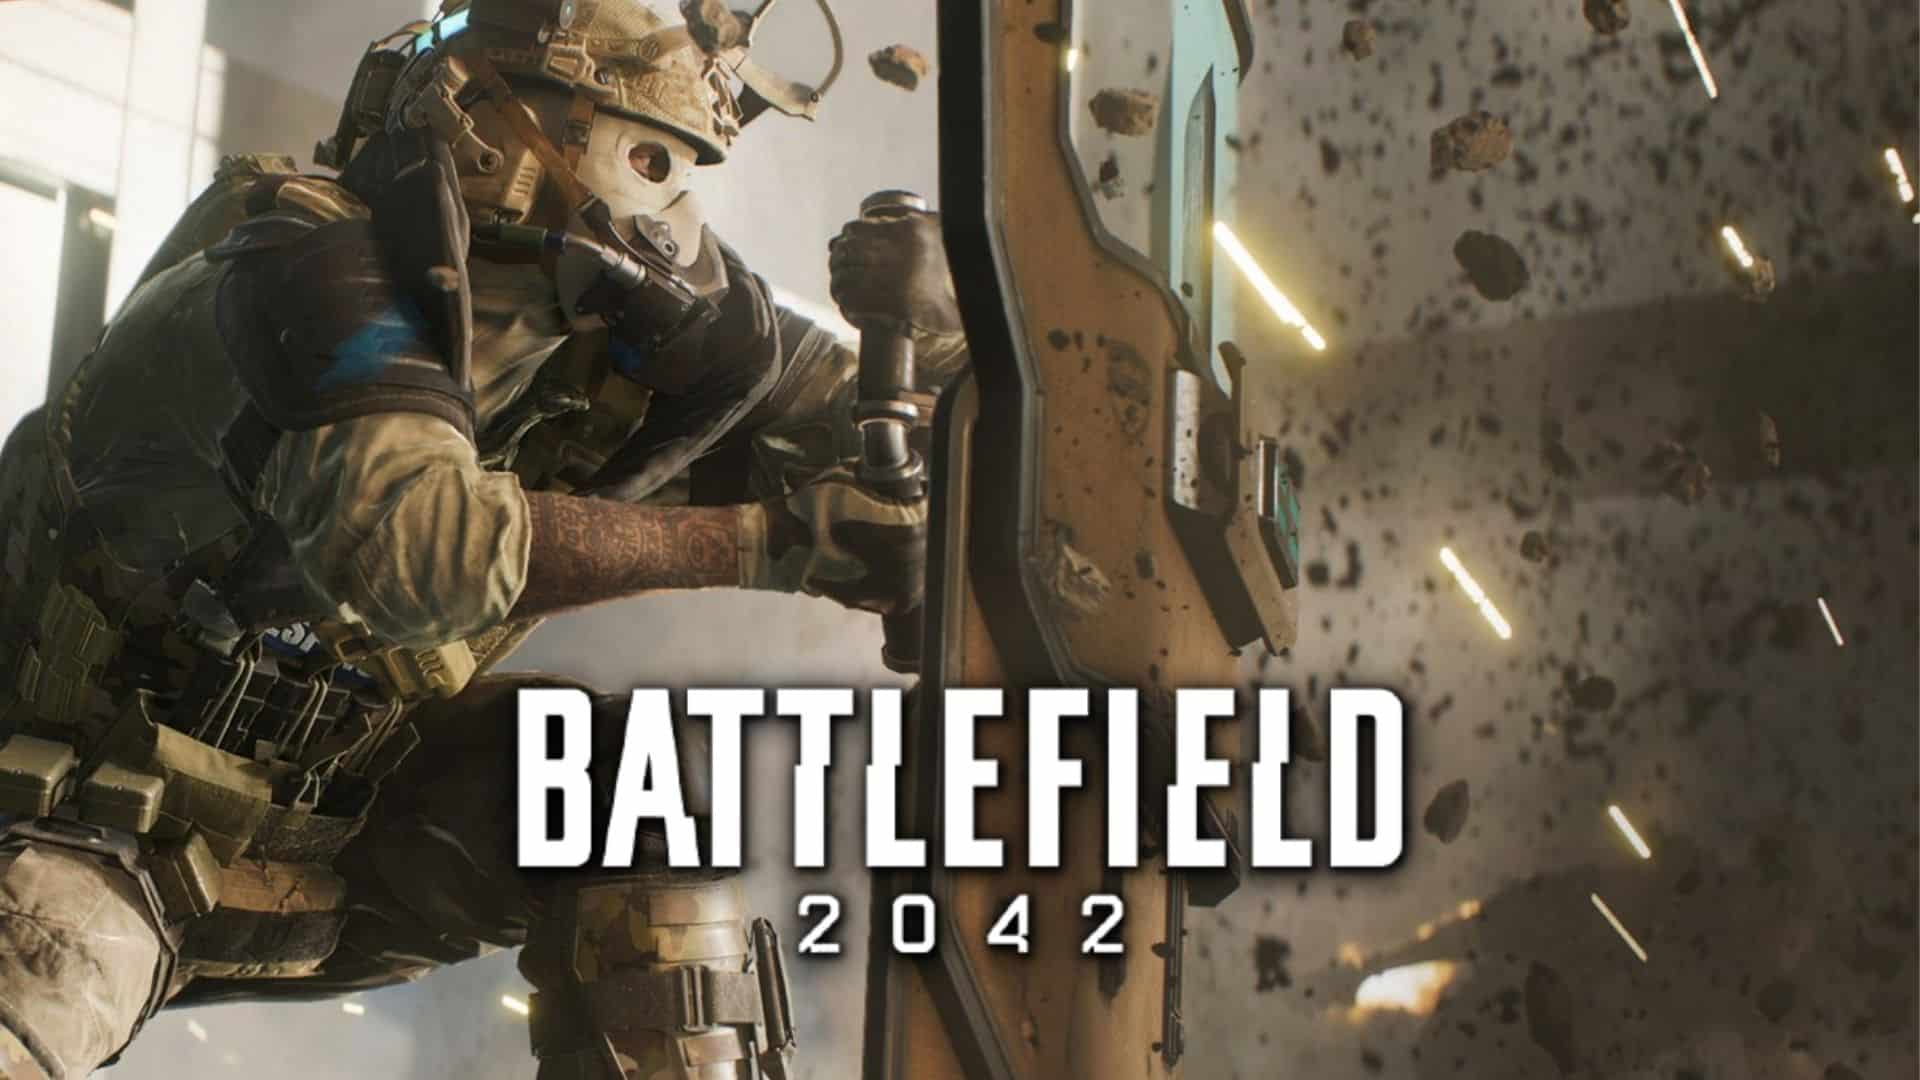 Battlefield 2042 PC Starter Guide: FPS Tweaks, Patches, and More!